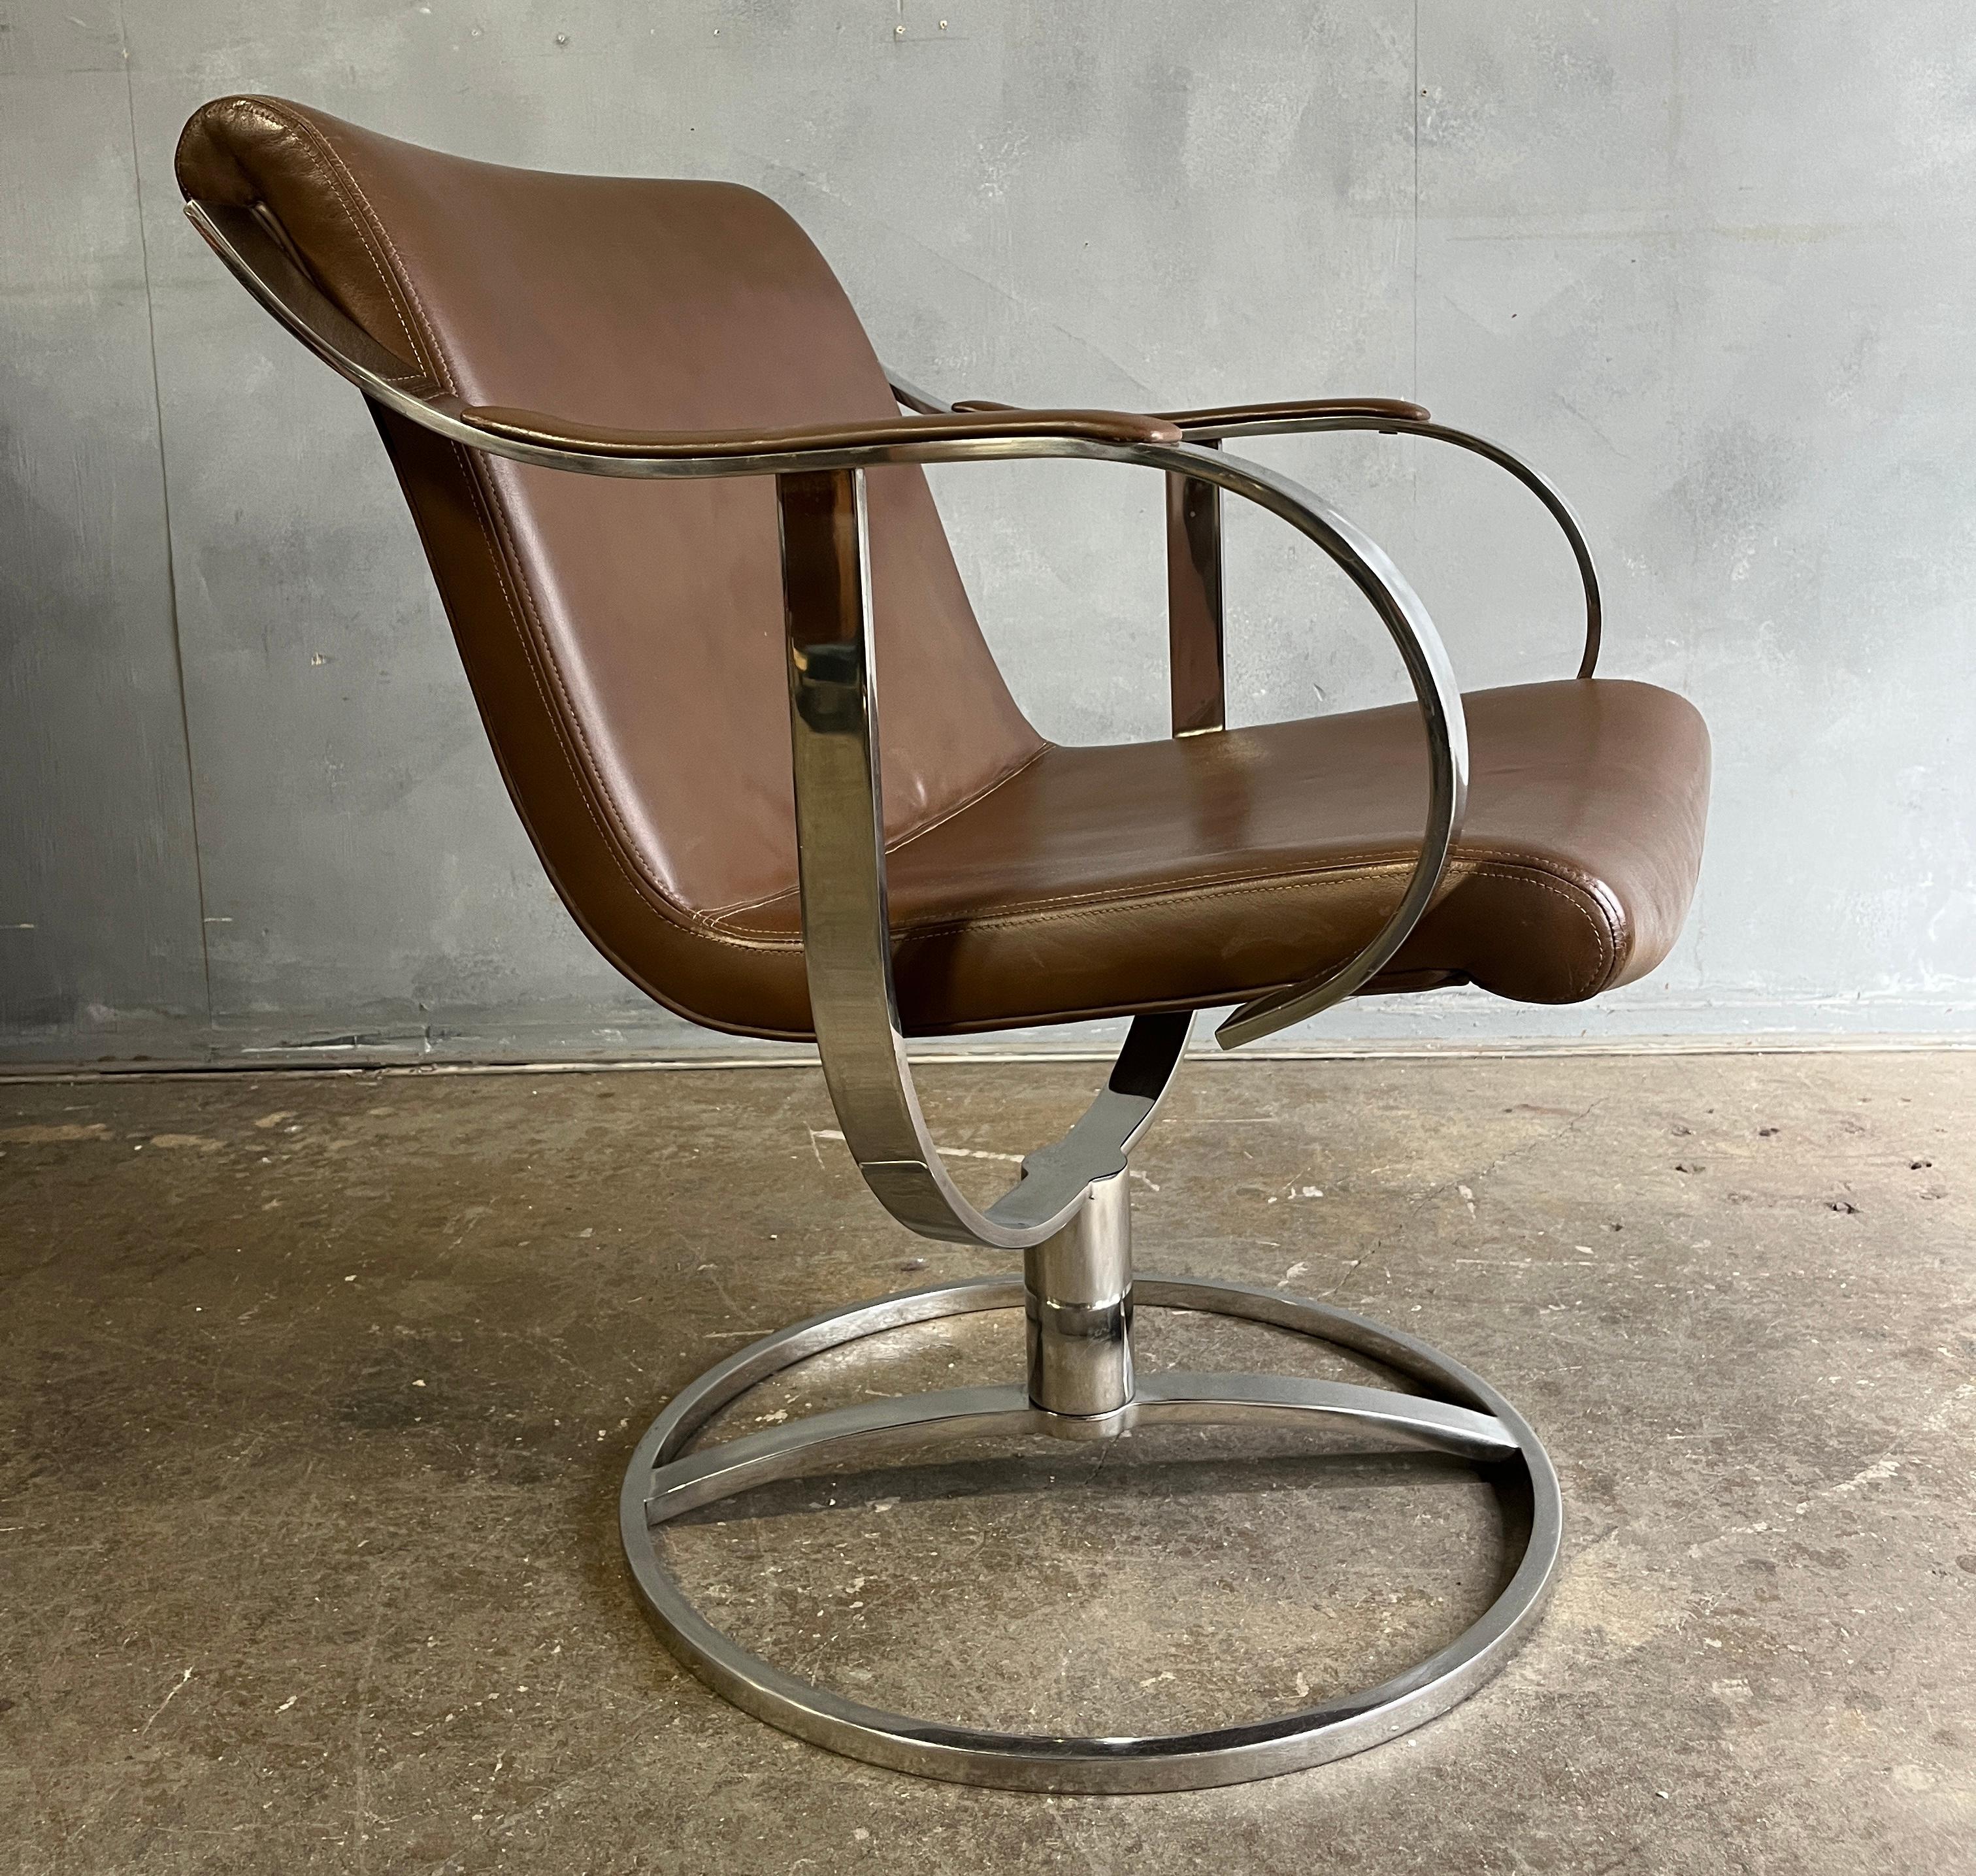 American Midcentury Leather and Chrome Swivel Chair For Sale